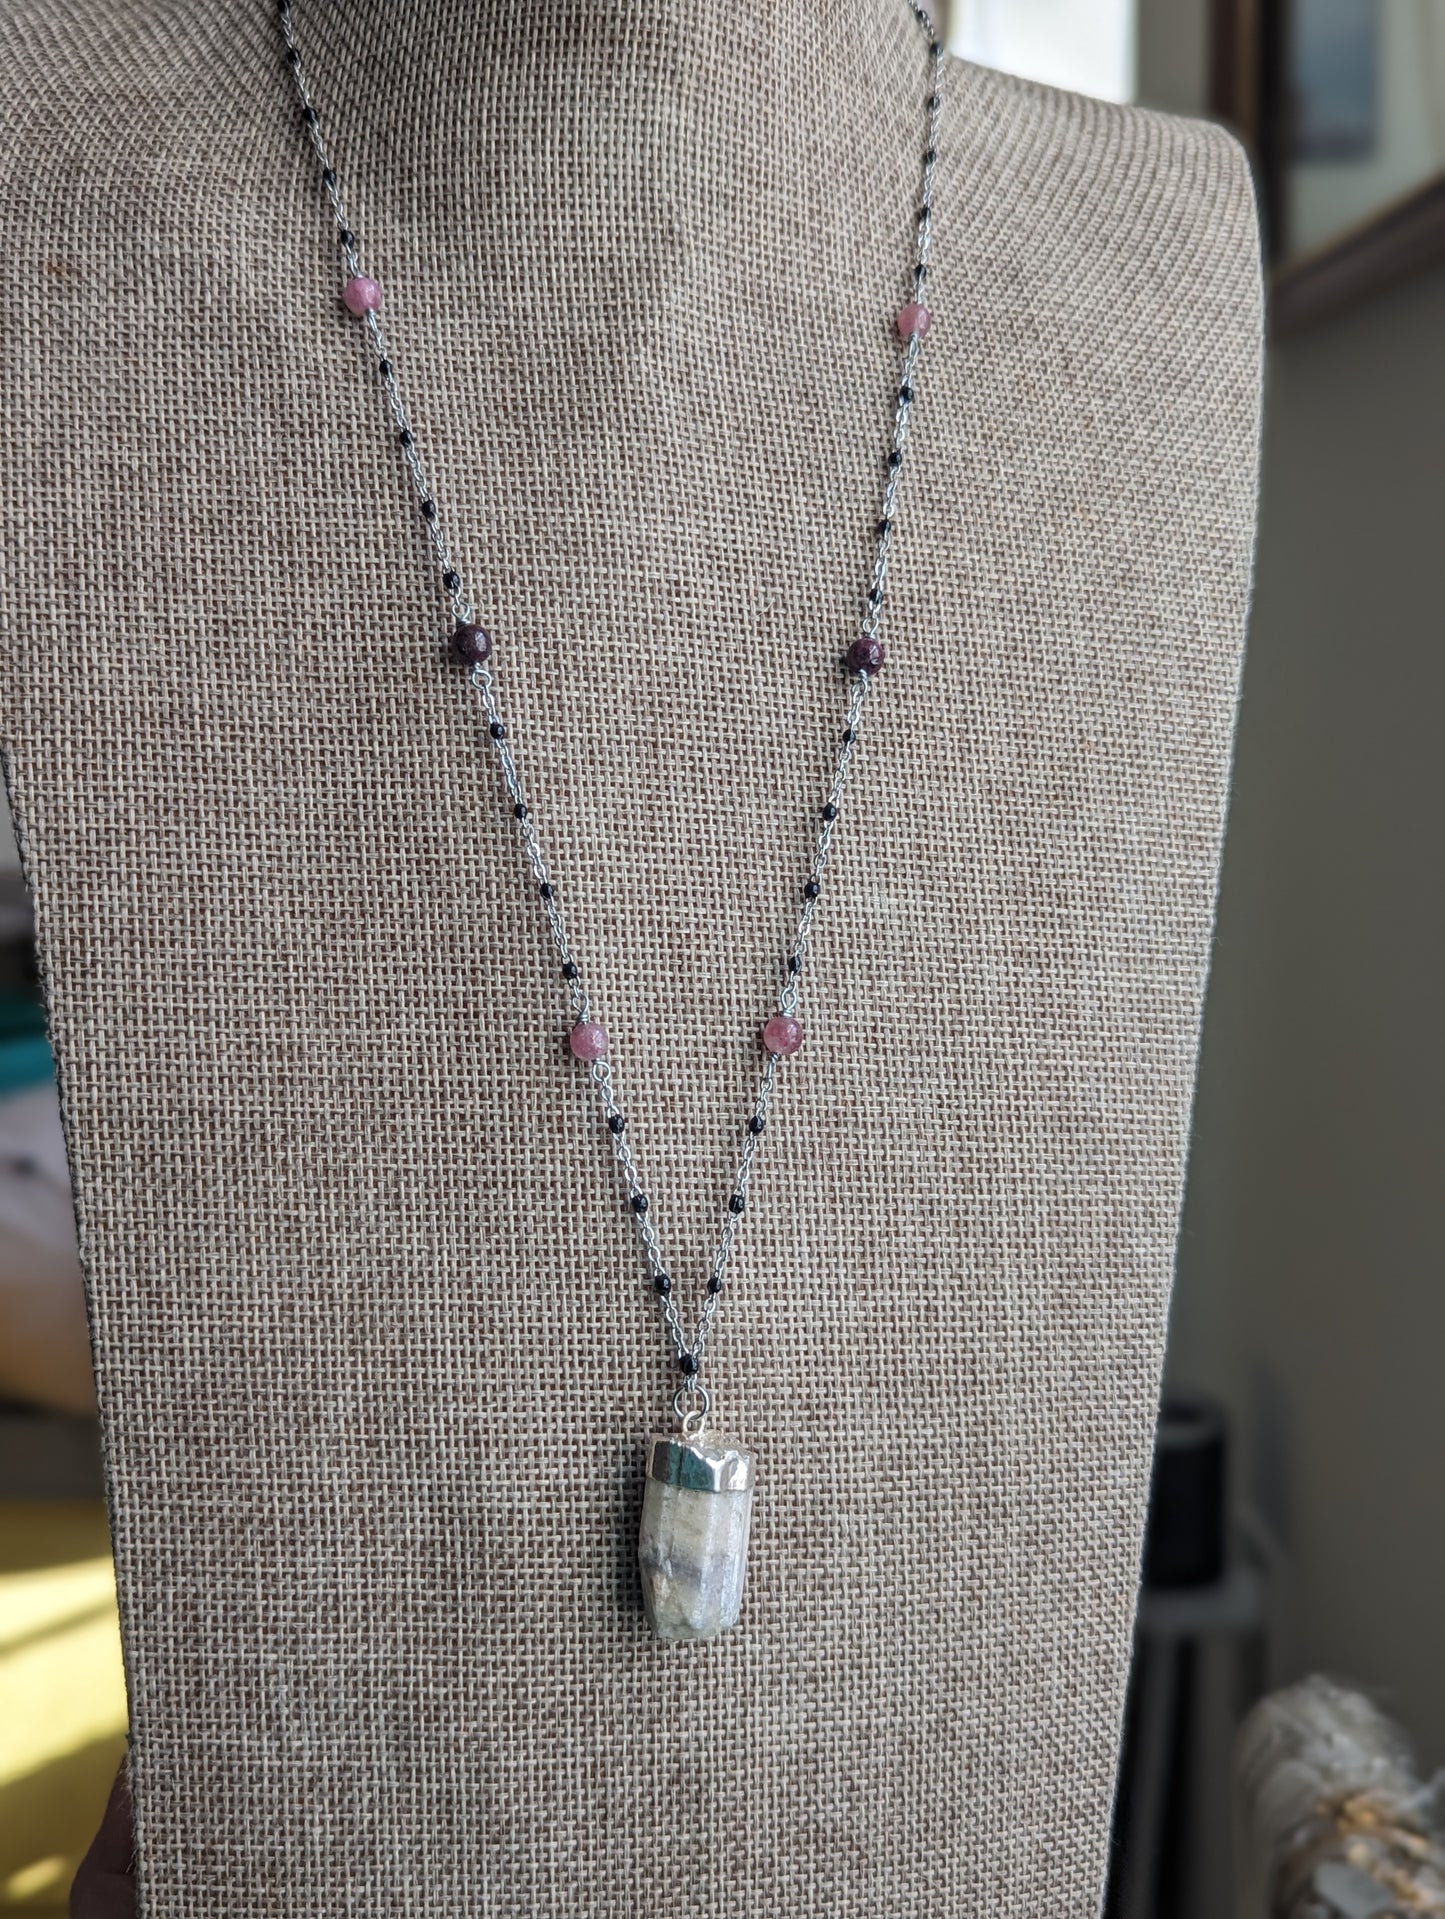 Raw Pink Tourmaline on Beaded Stainless/Black Enamel Necklace